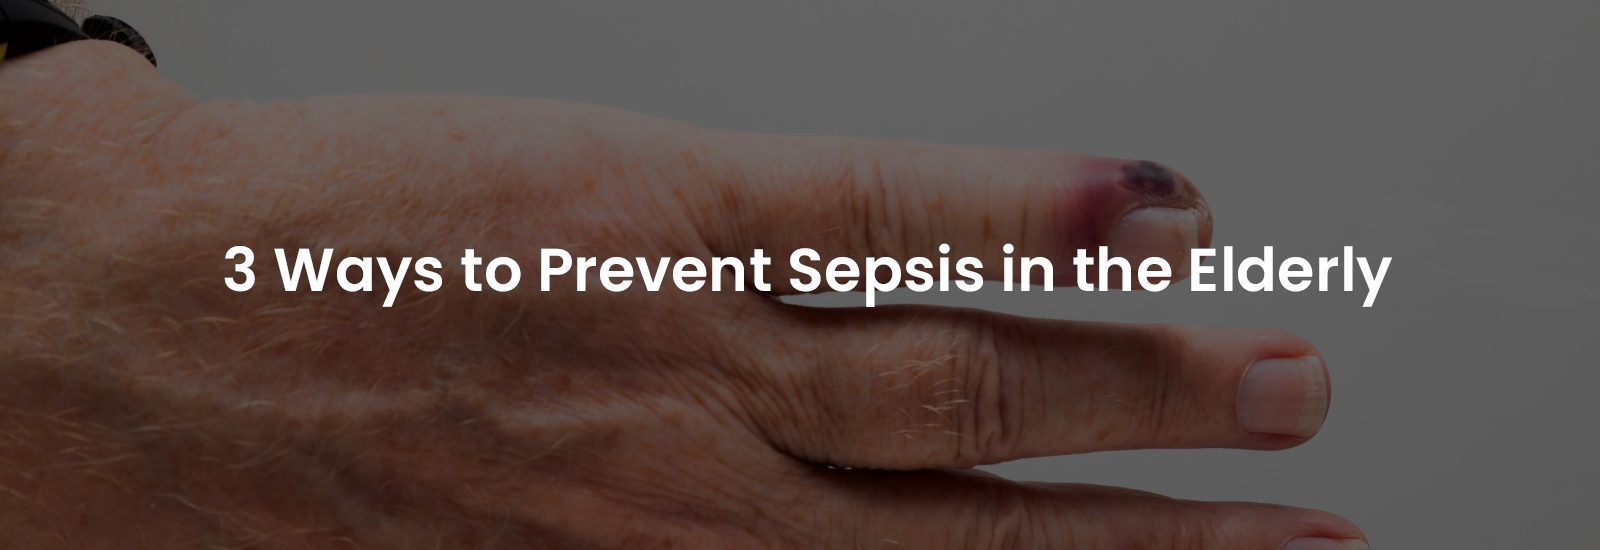 3 Ways to Prevent Sepsis in the Elderly | Banner Image